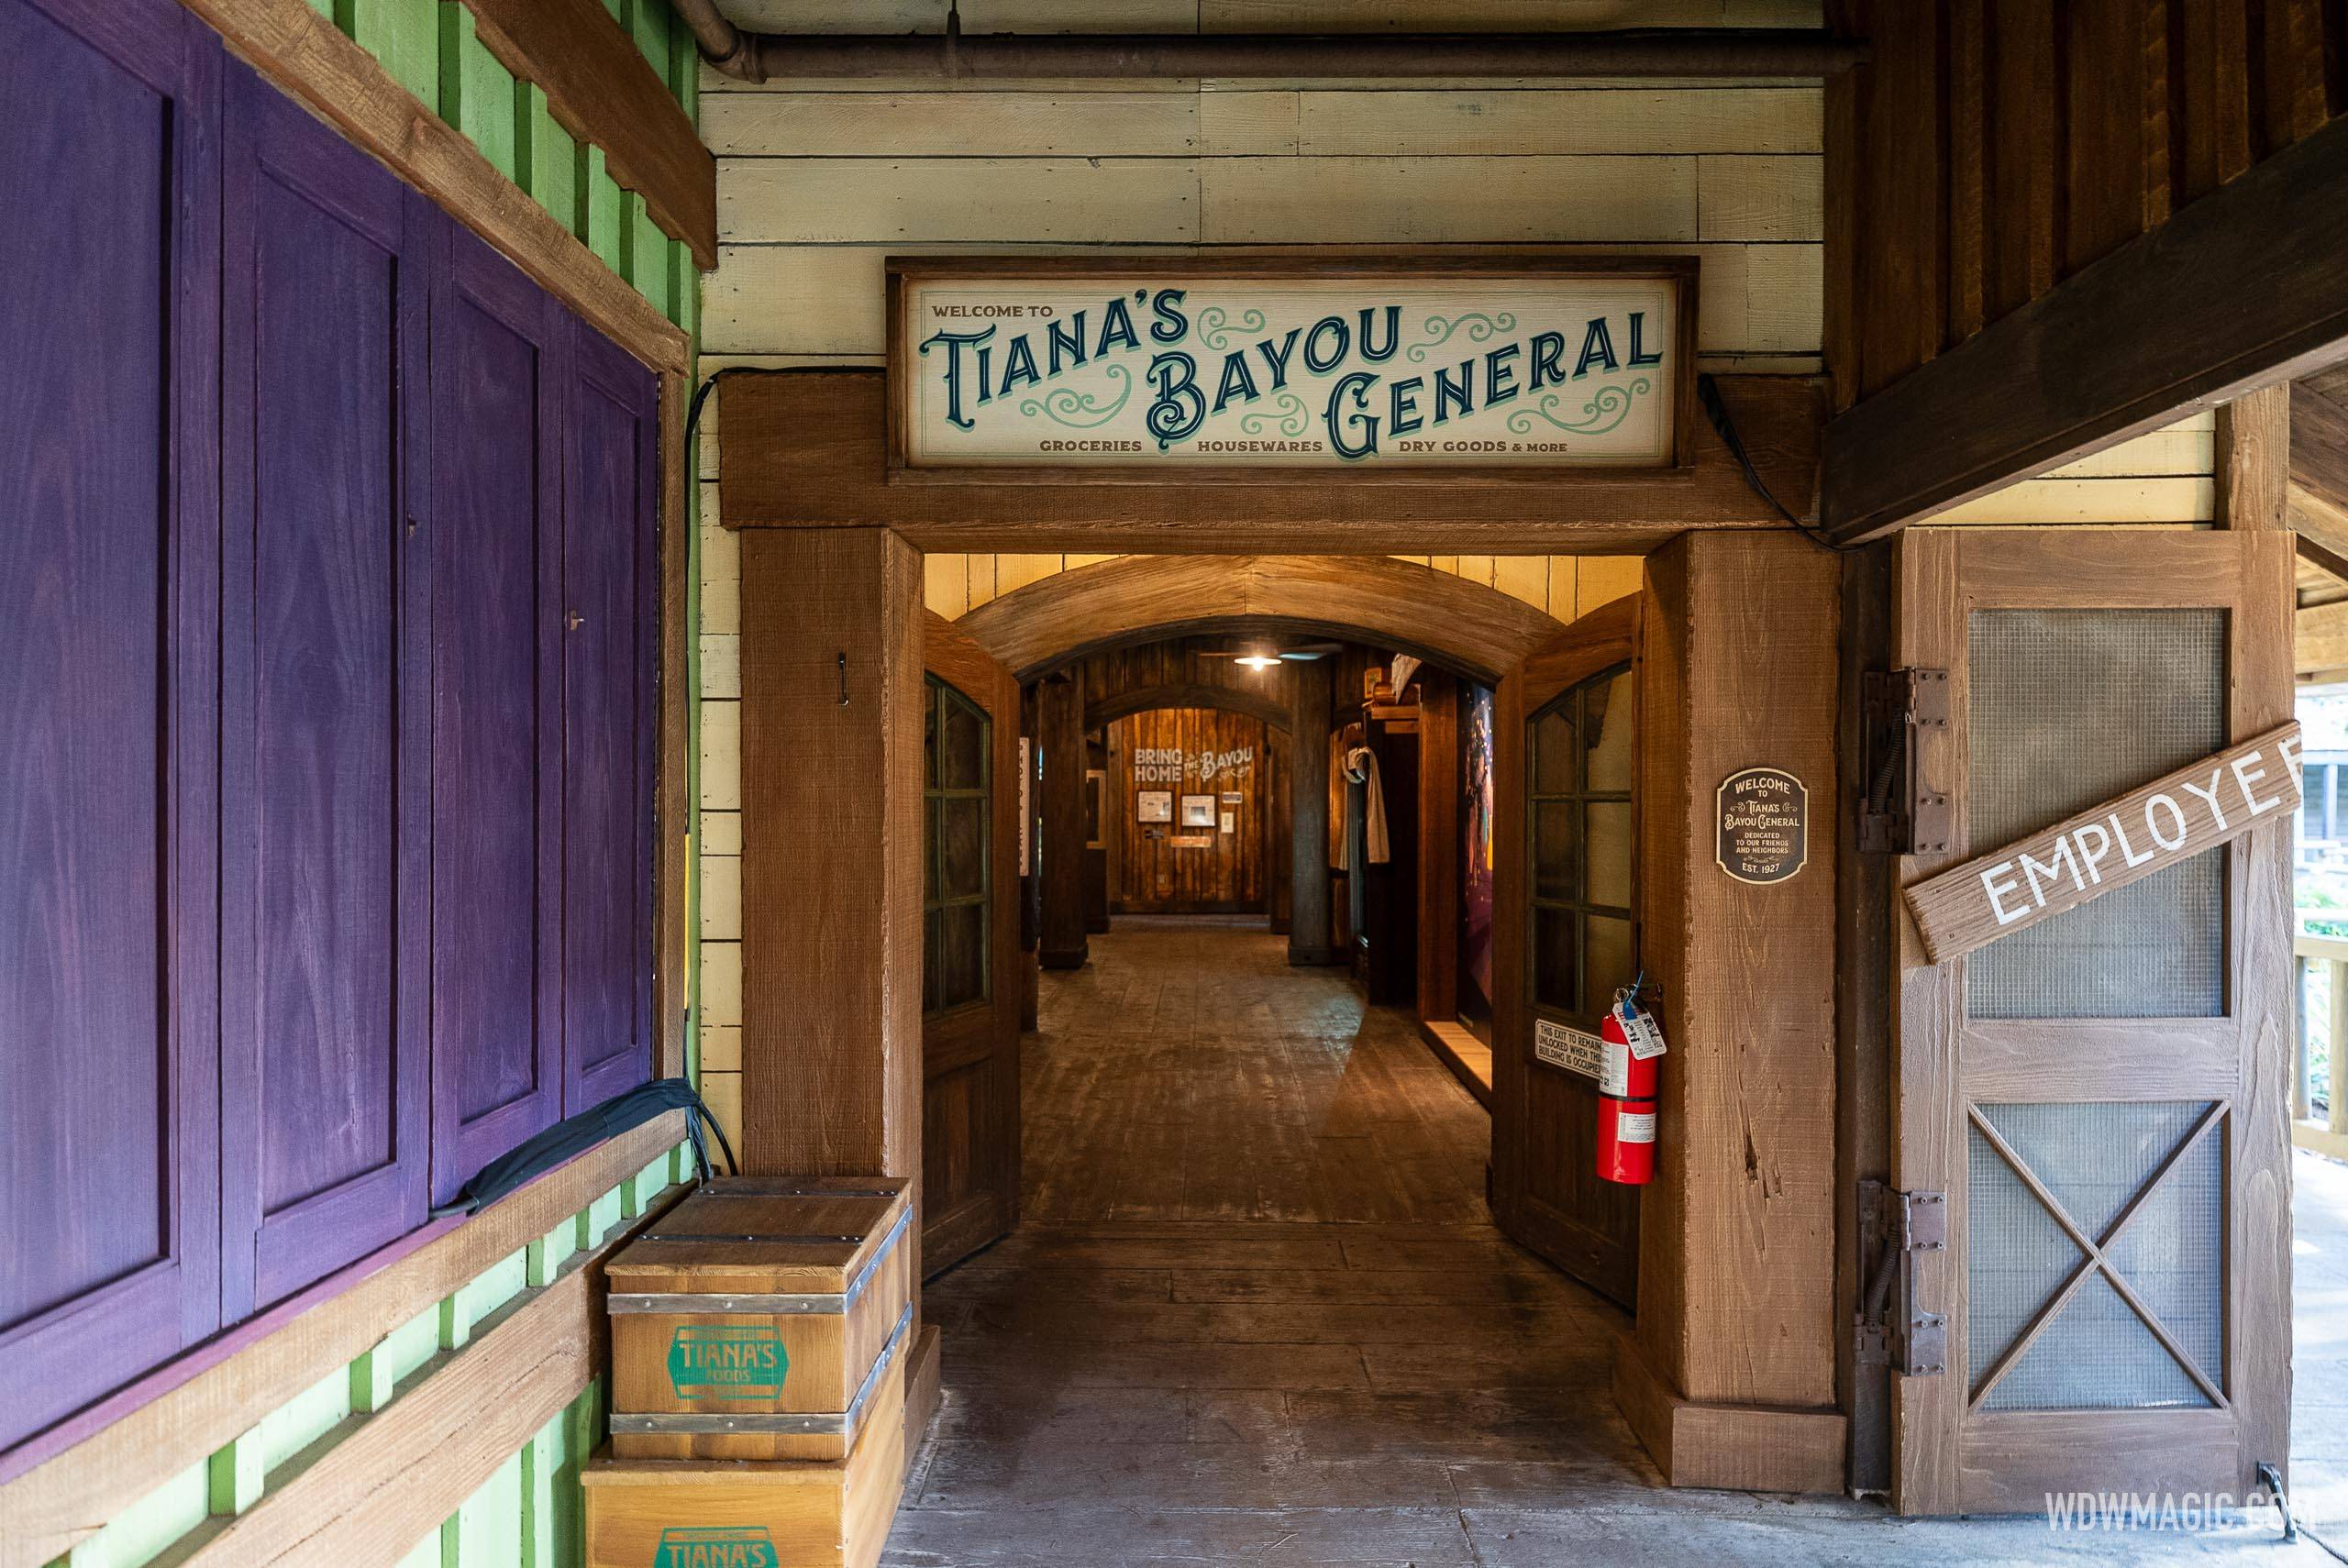 Tiana's Bayou General overview